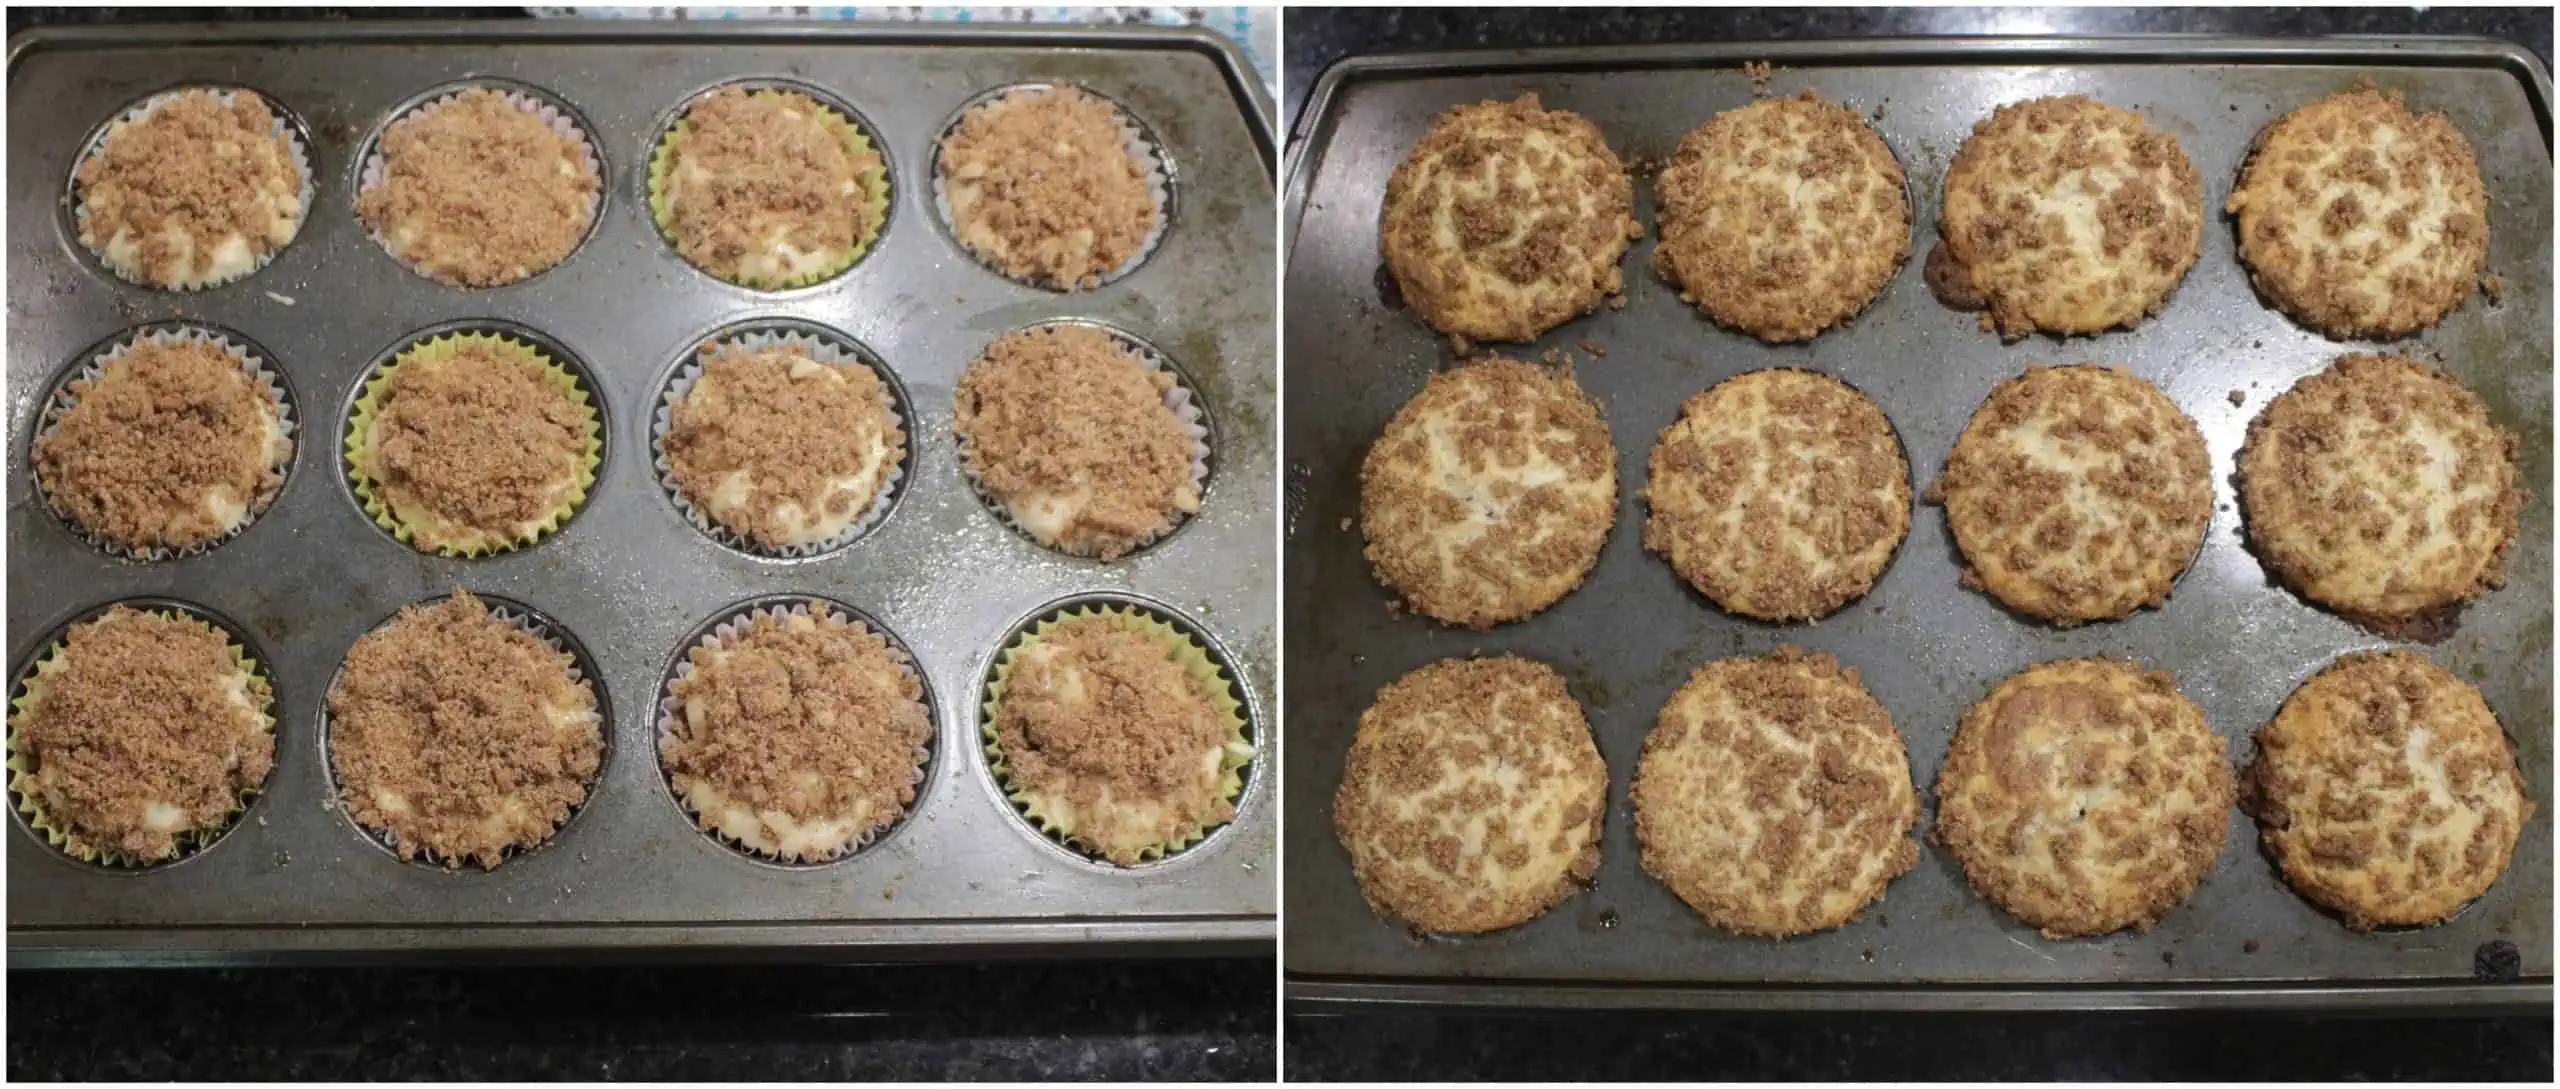 Muffin batter in tin and baked muffin.